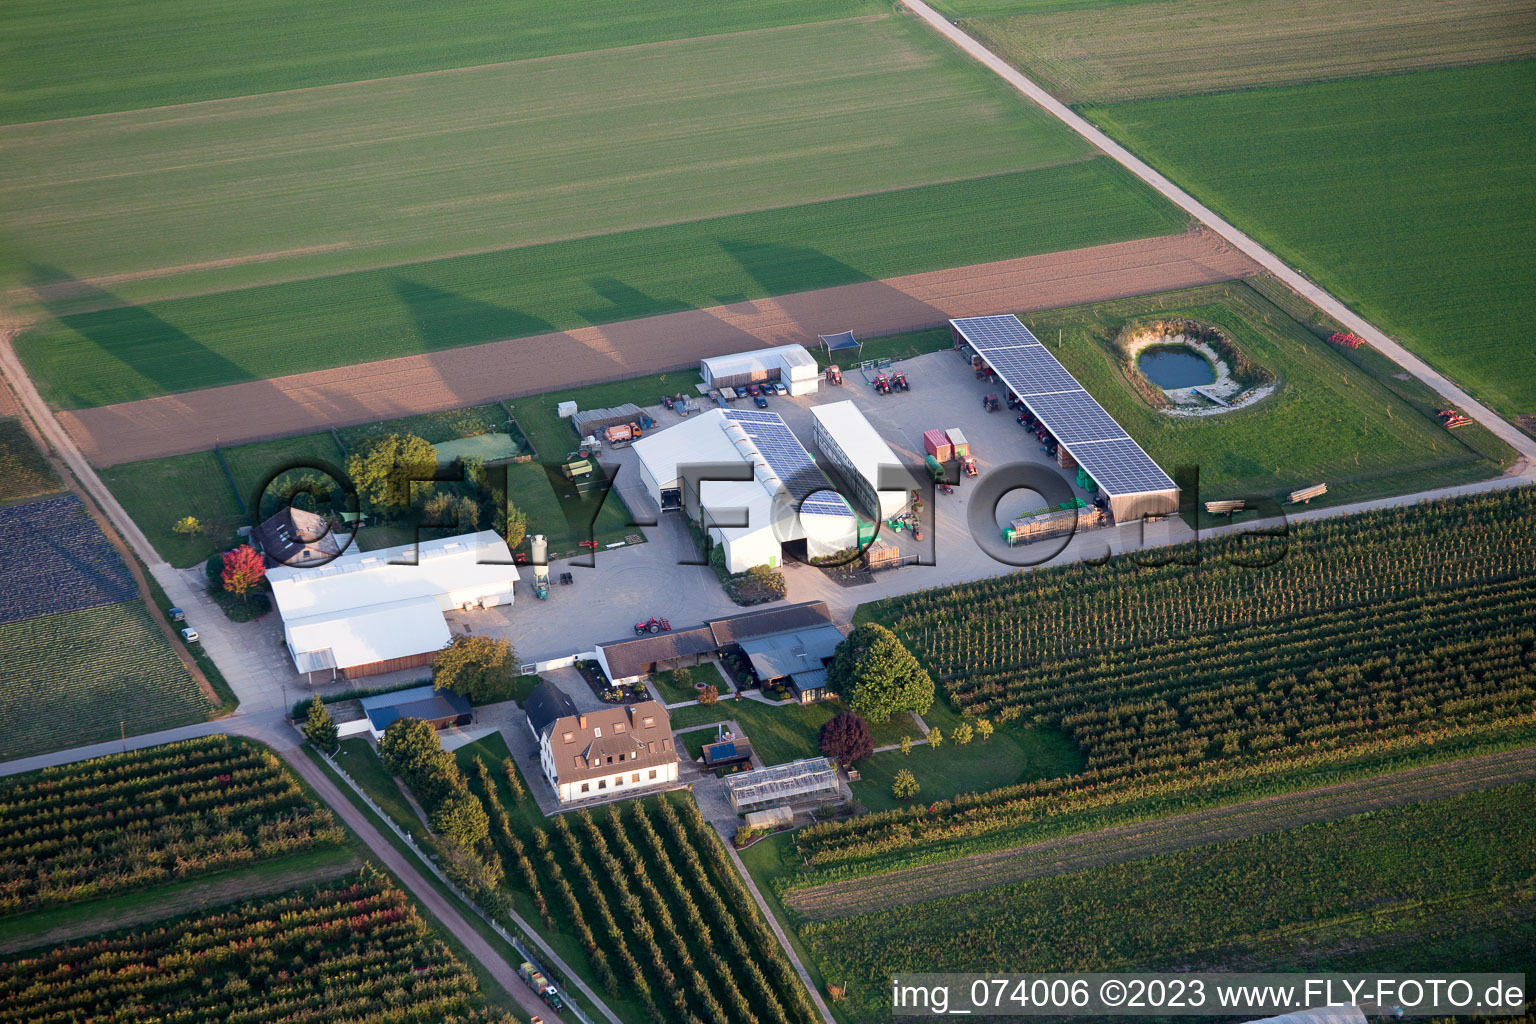 Aerial photograpy of Organic farm in Winden in the state Rhineland-Palatinate, Germany